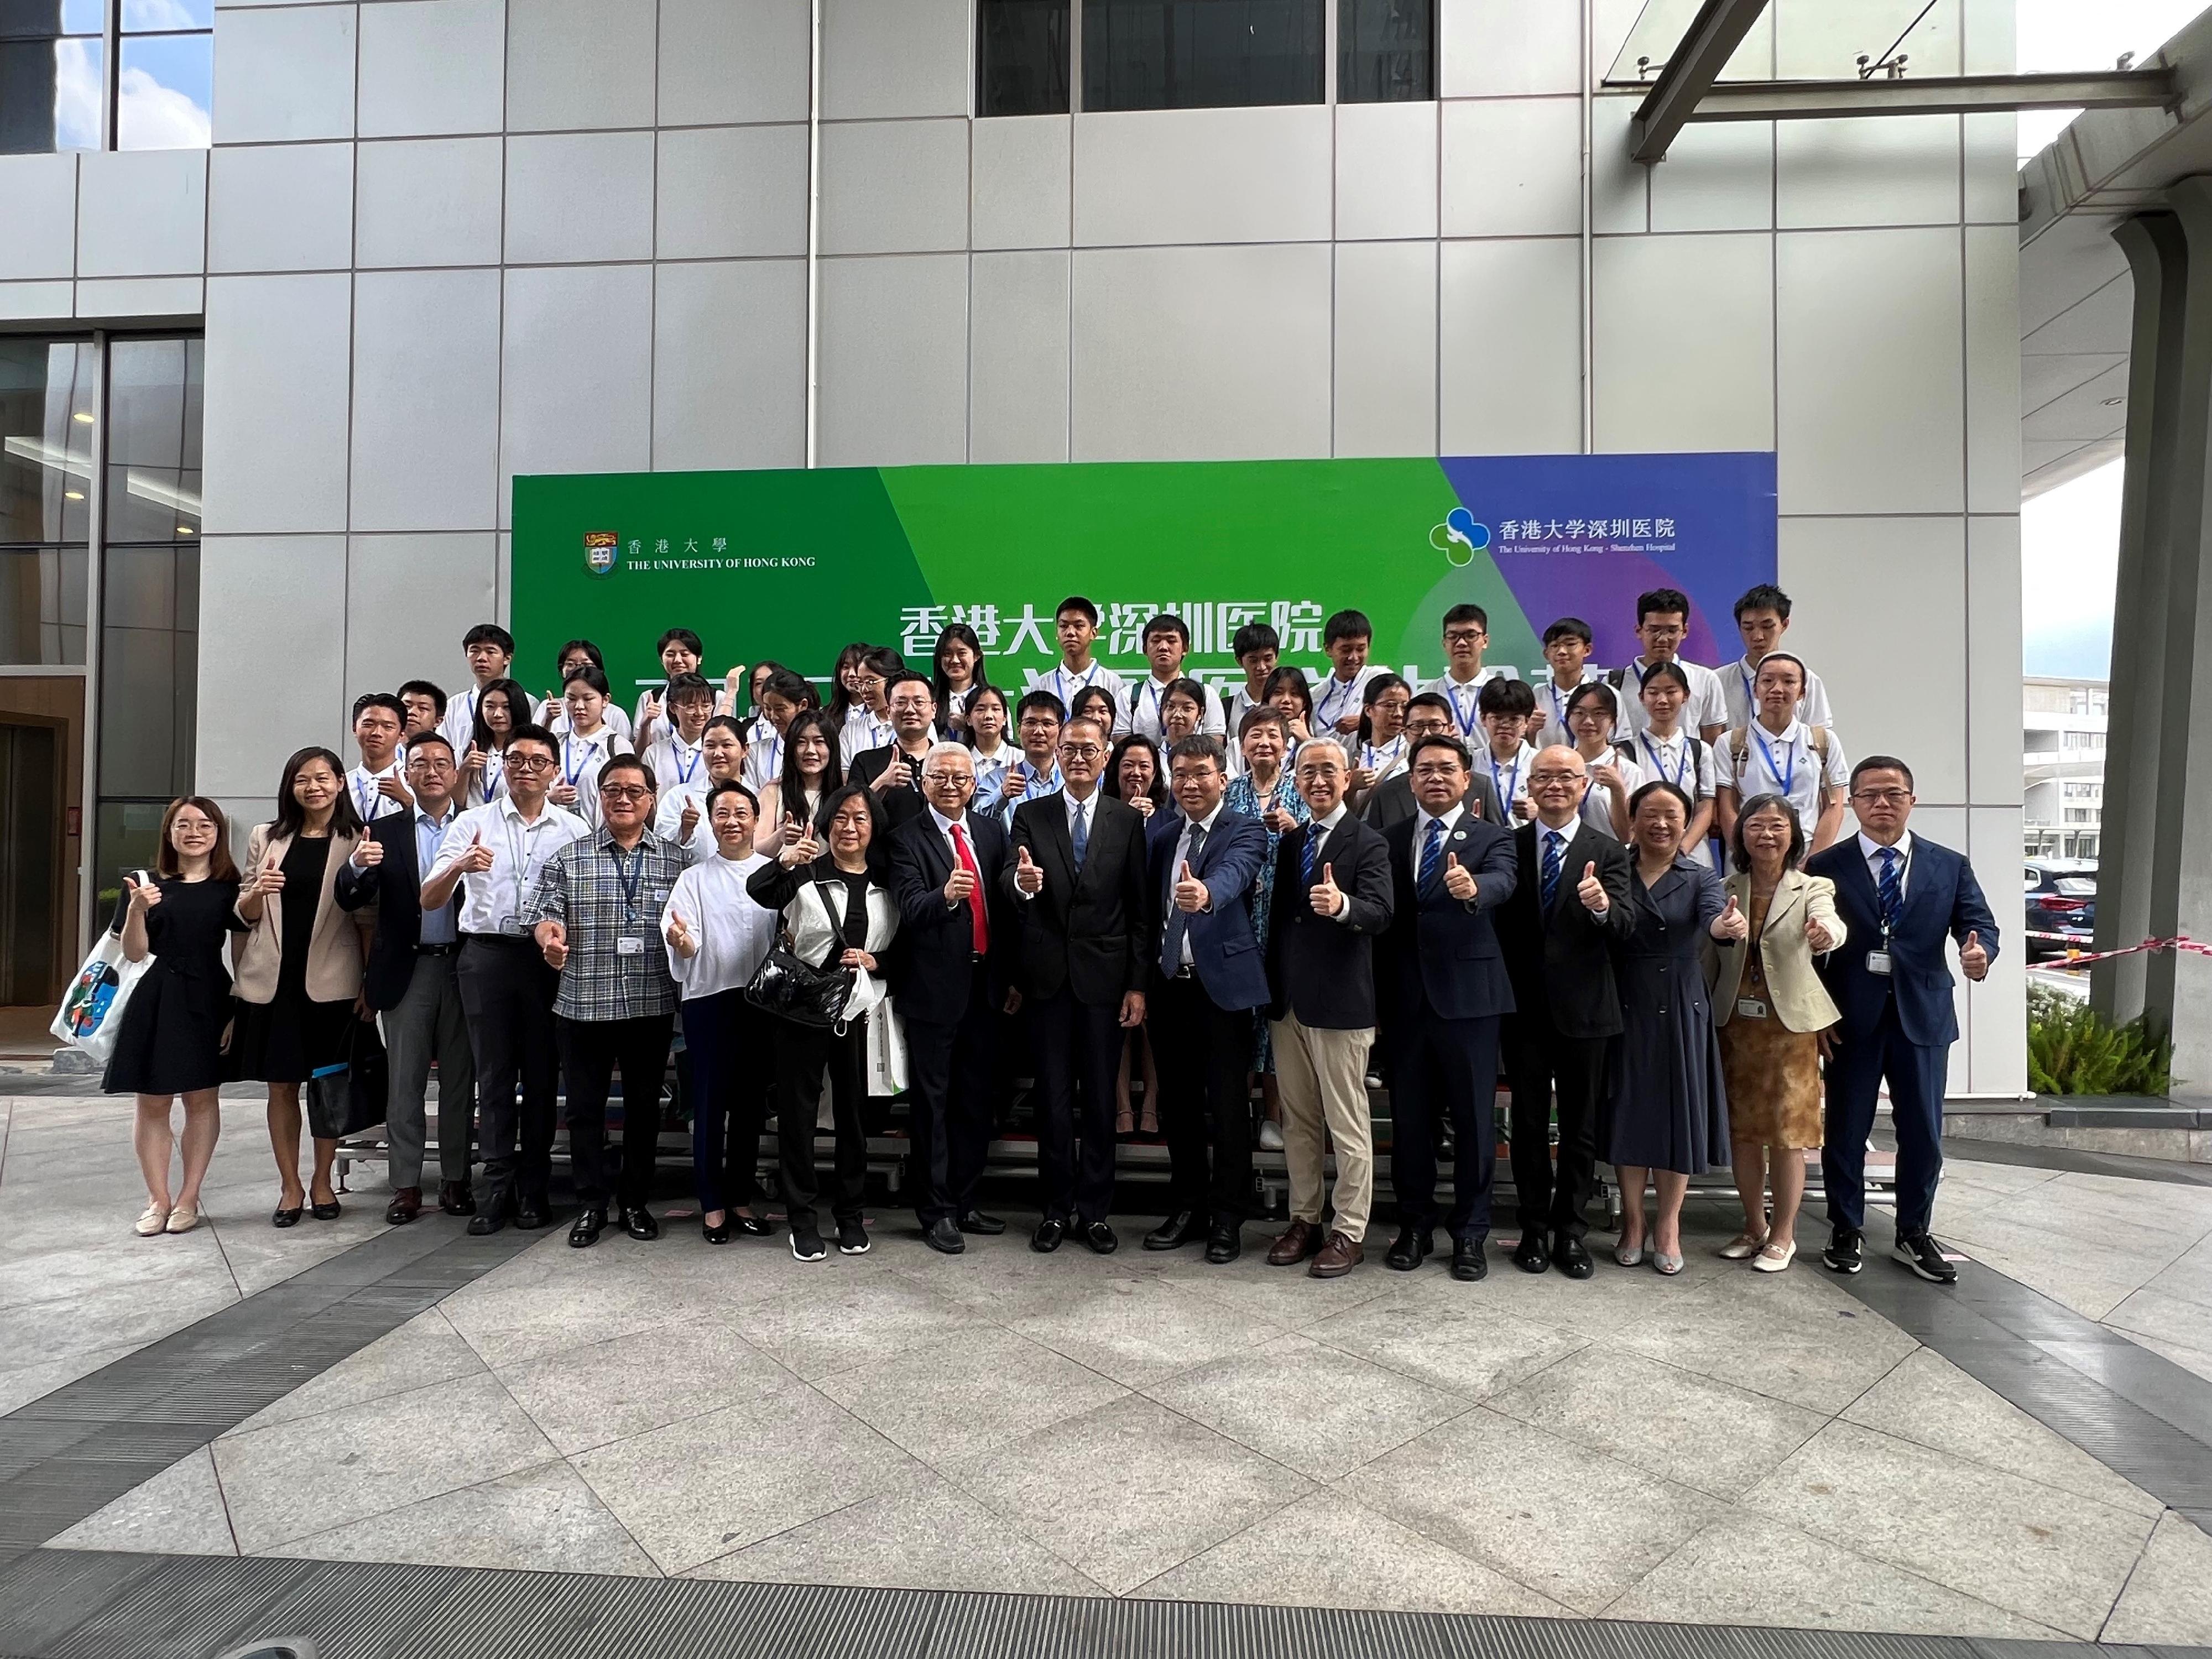 The Secretary for Health, Professor Lo Chung-mau (front row, eighth right), is in a group photo with the Hospital-Chief-Executive of the University of Hong Kong-Shenzhen Hospital (HKU-SZH), Professor Kenneth Cheung (front row, sixth right), other guests and students after attending the kick-off ceremony of the Greater Bay Area Medical Experience Camp 2023 of the HKU-SZH in Shenzhen today (July 31).